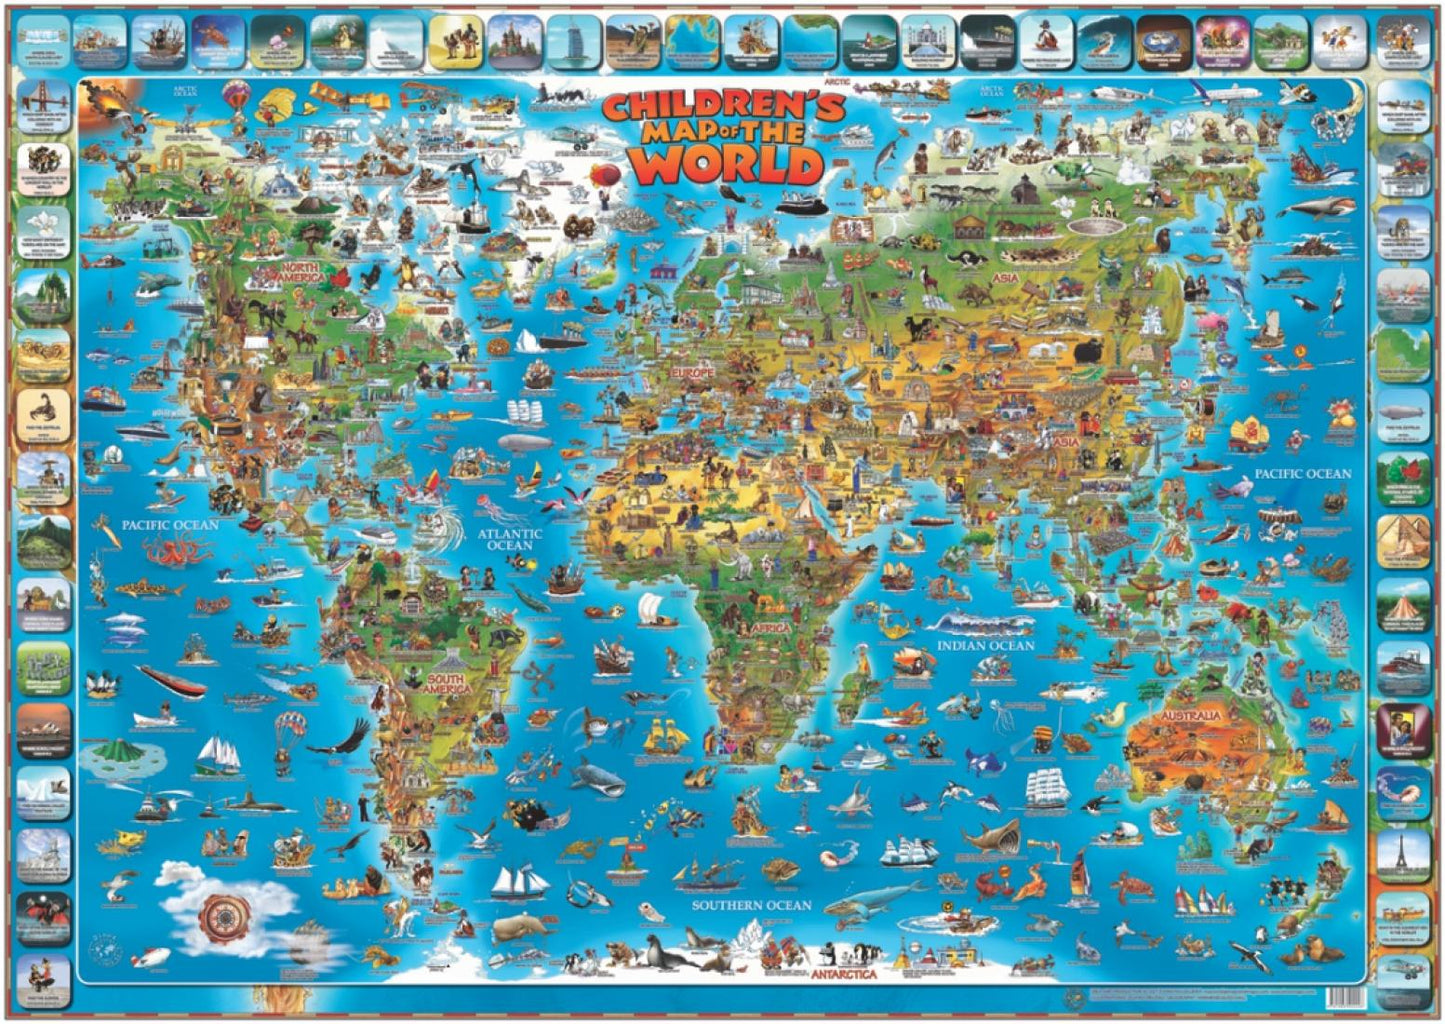 Dino's Illustrated Children's Map of the World, 38" x 54"